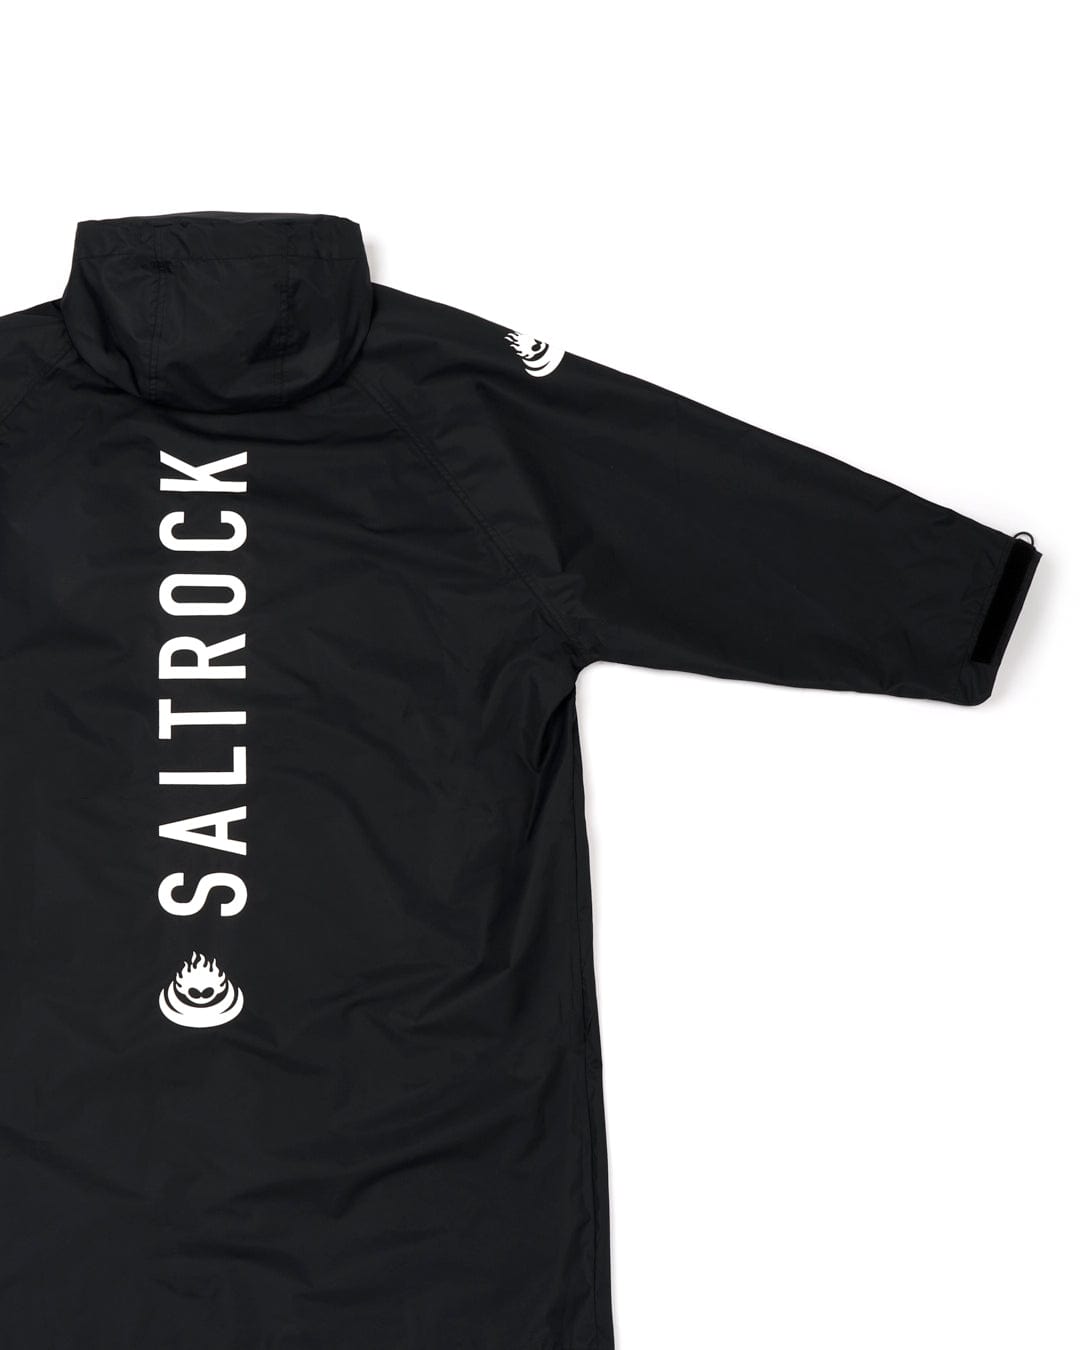 Black 3 in 1 Recycled Four Seasons Changing Robe with "Saltrock" logo and a small wave icon on the chest, displayed flat on a white background.